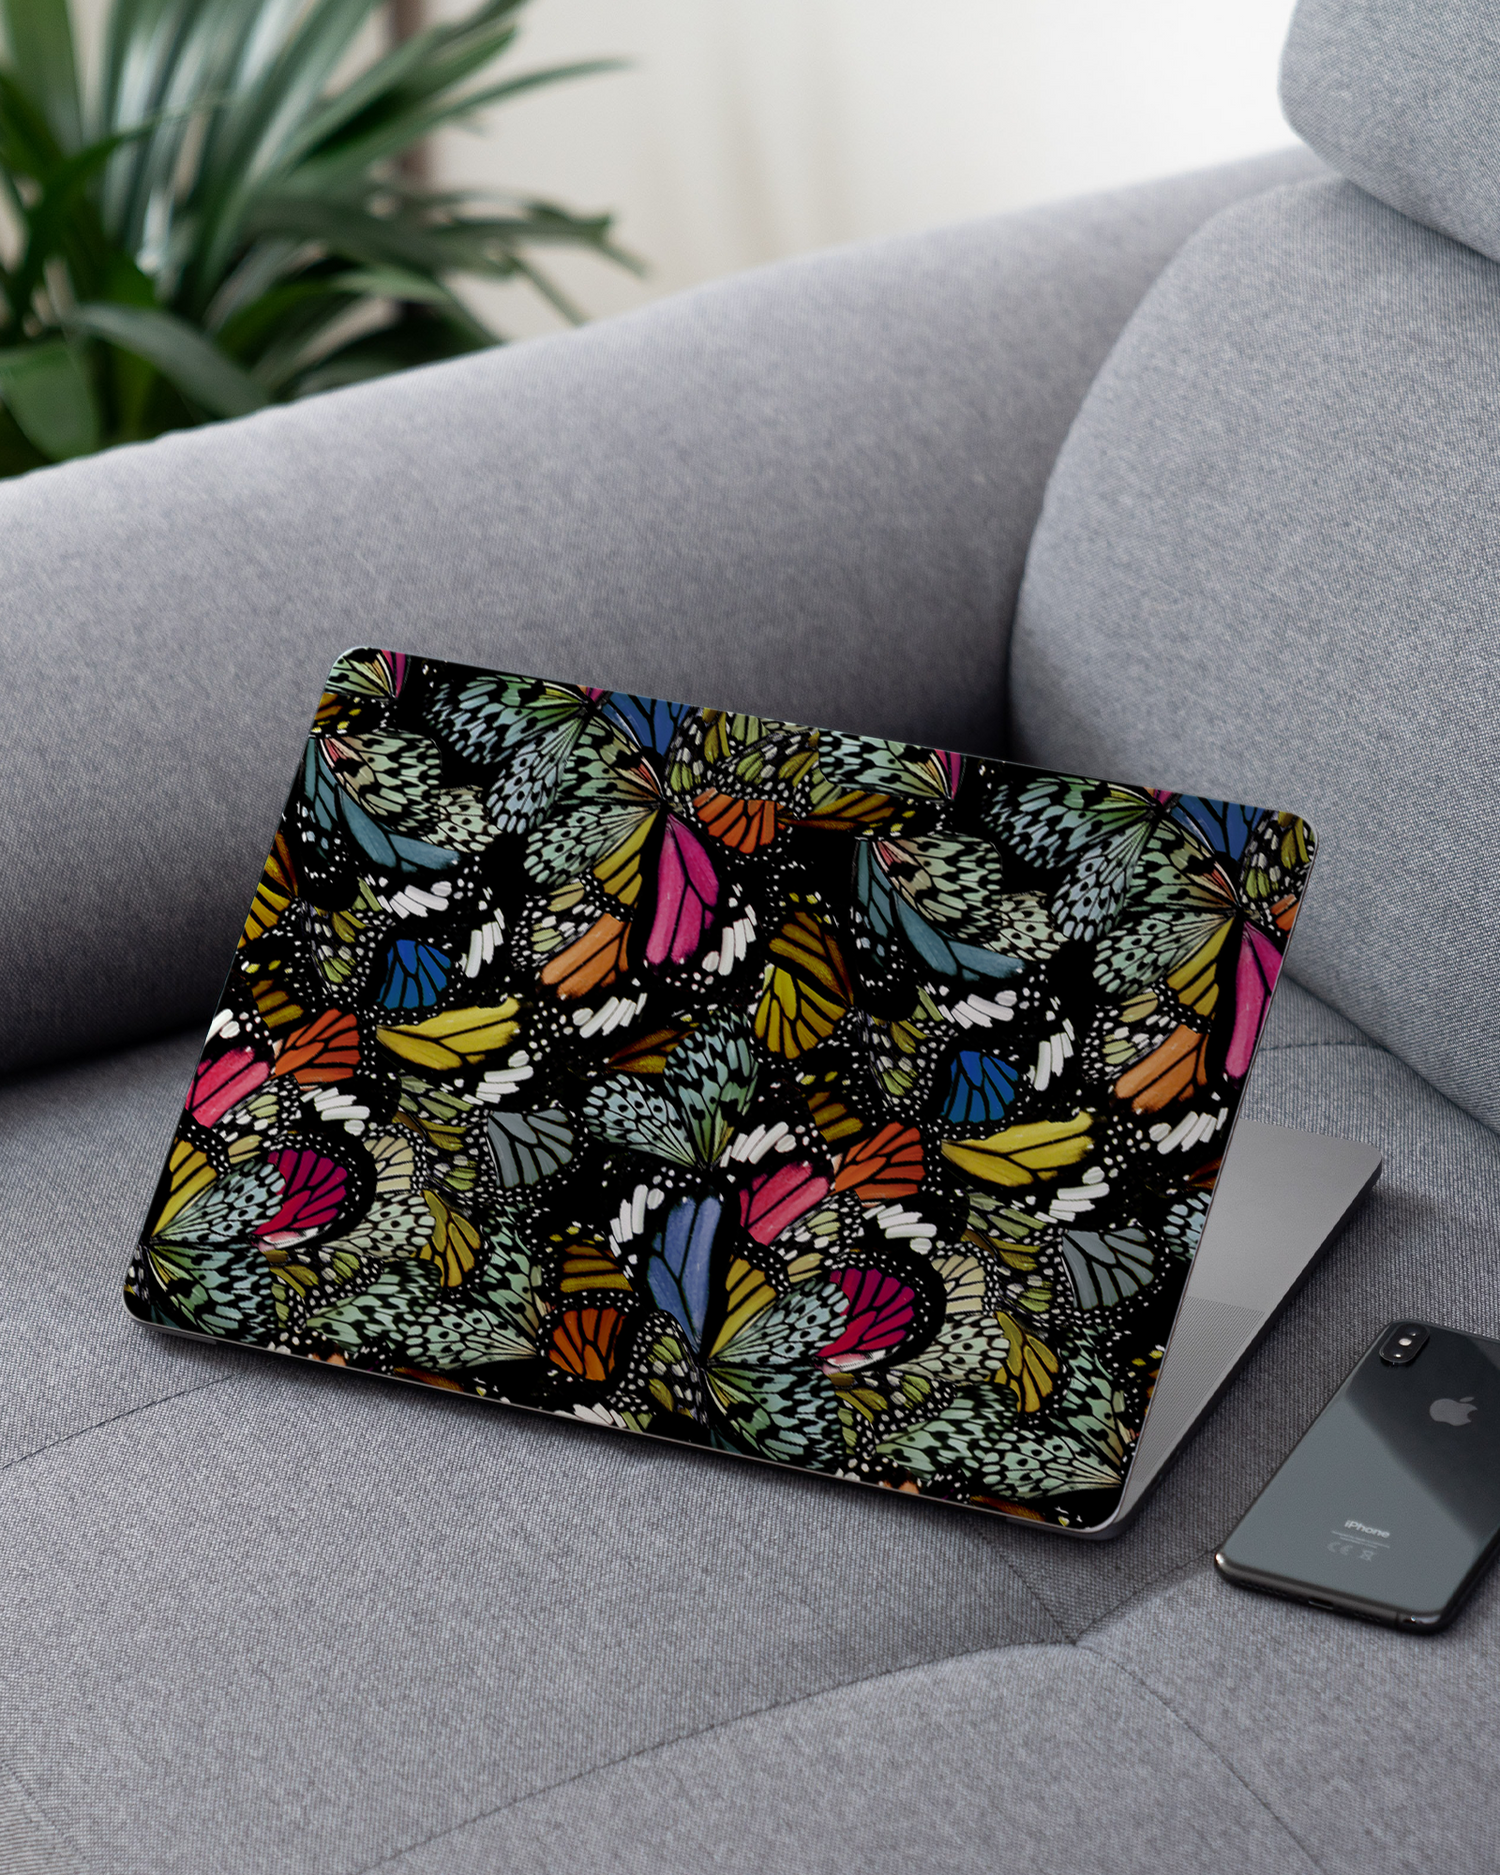 Psychedelic Butterflies Laptop Skin for 13 inch Apple MacBooks on a couch